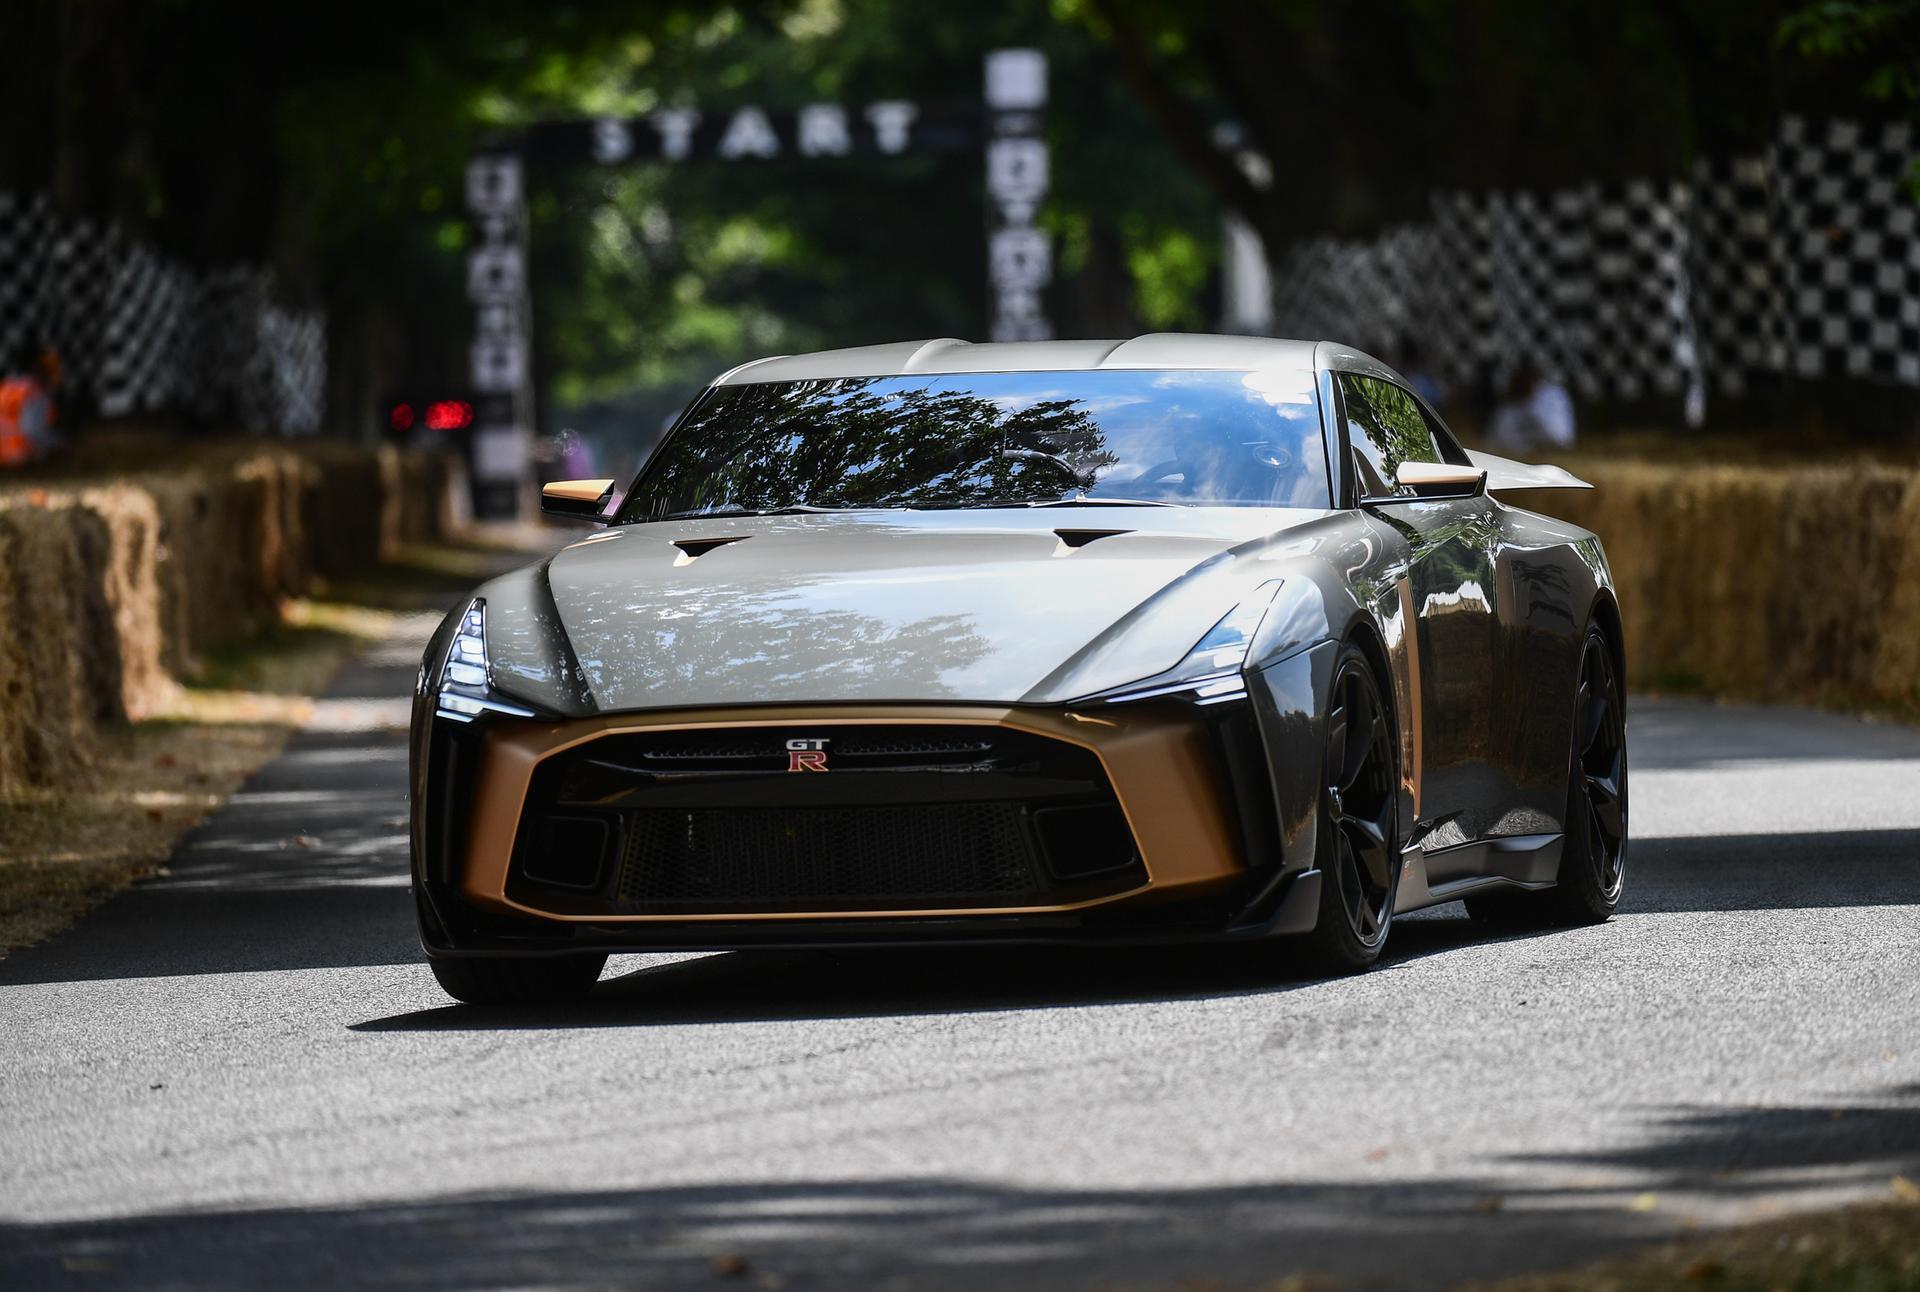 Nissan GT-R celebrates 50th anniversary with striking special